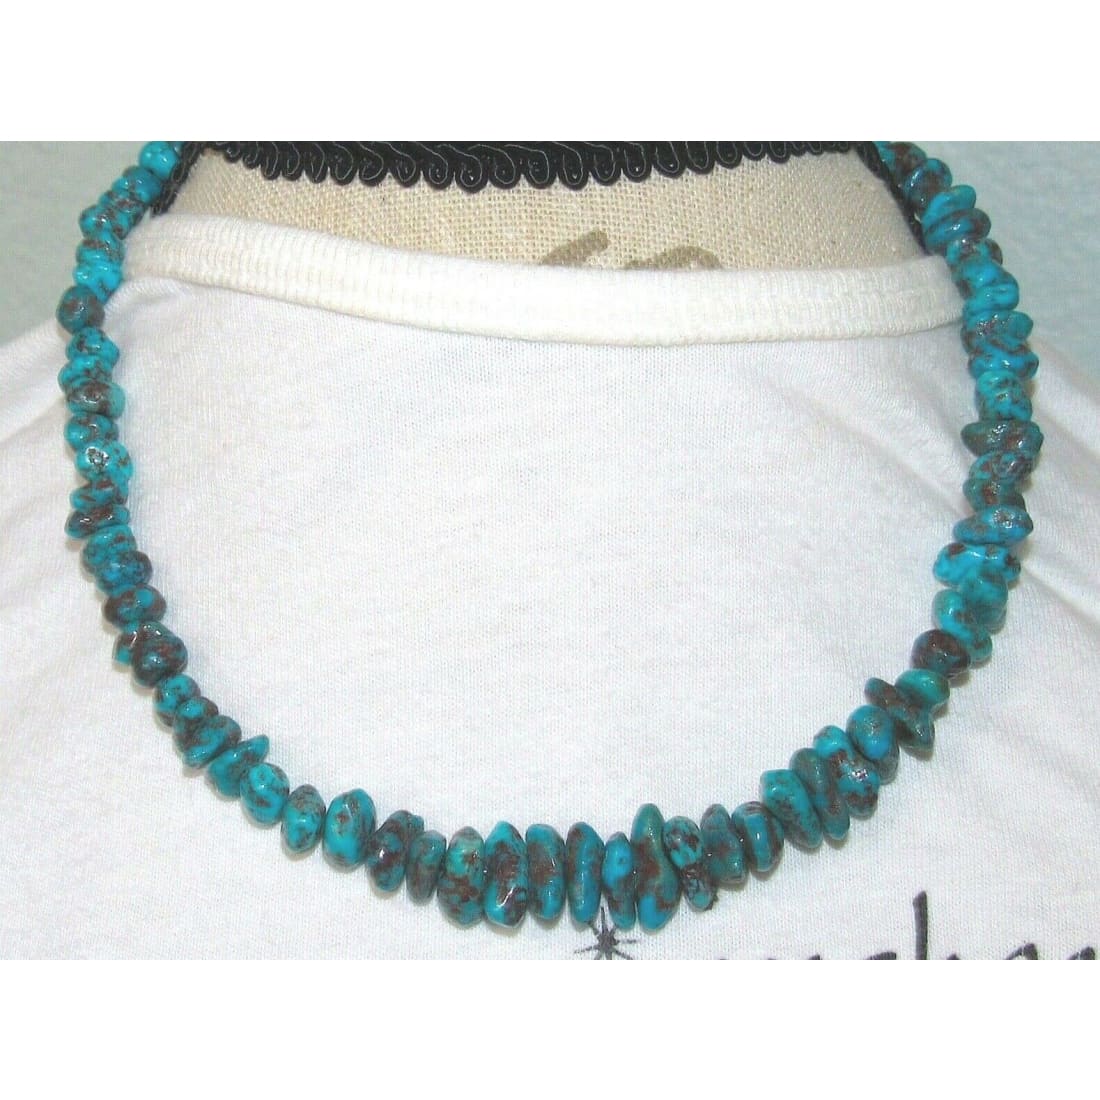 Old Pawn Navajo Morenci Turquoise Heishi Necklace Choker 17 